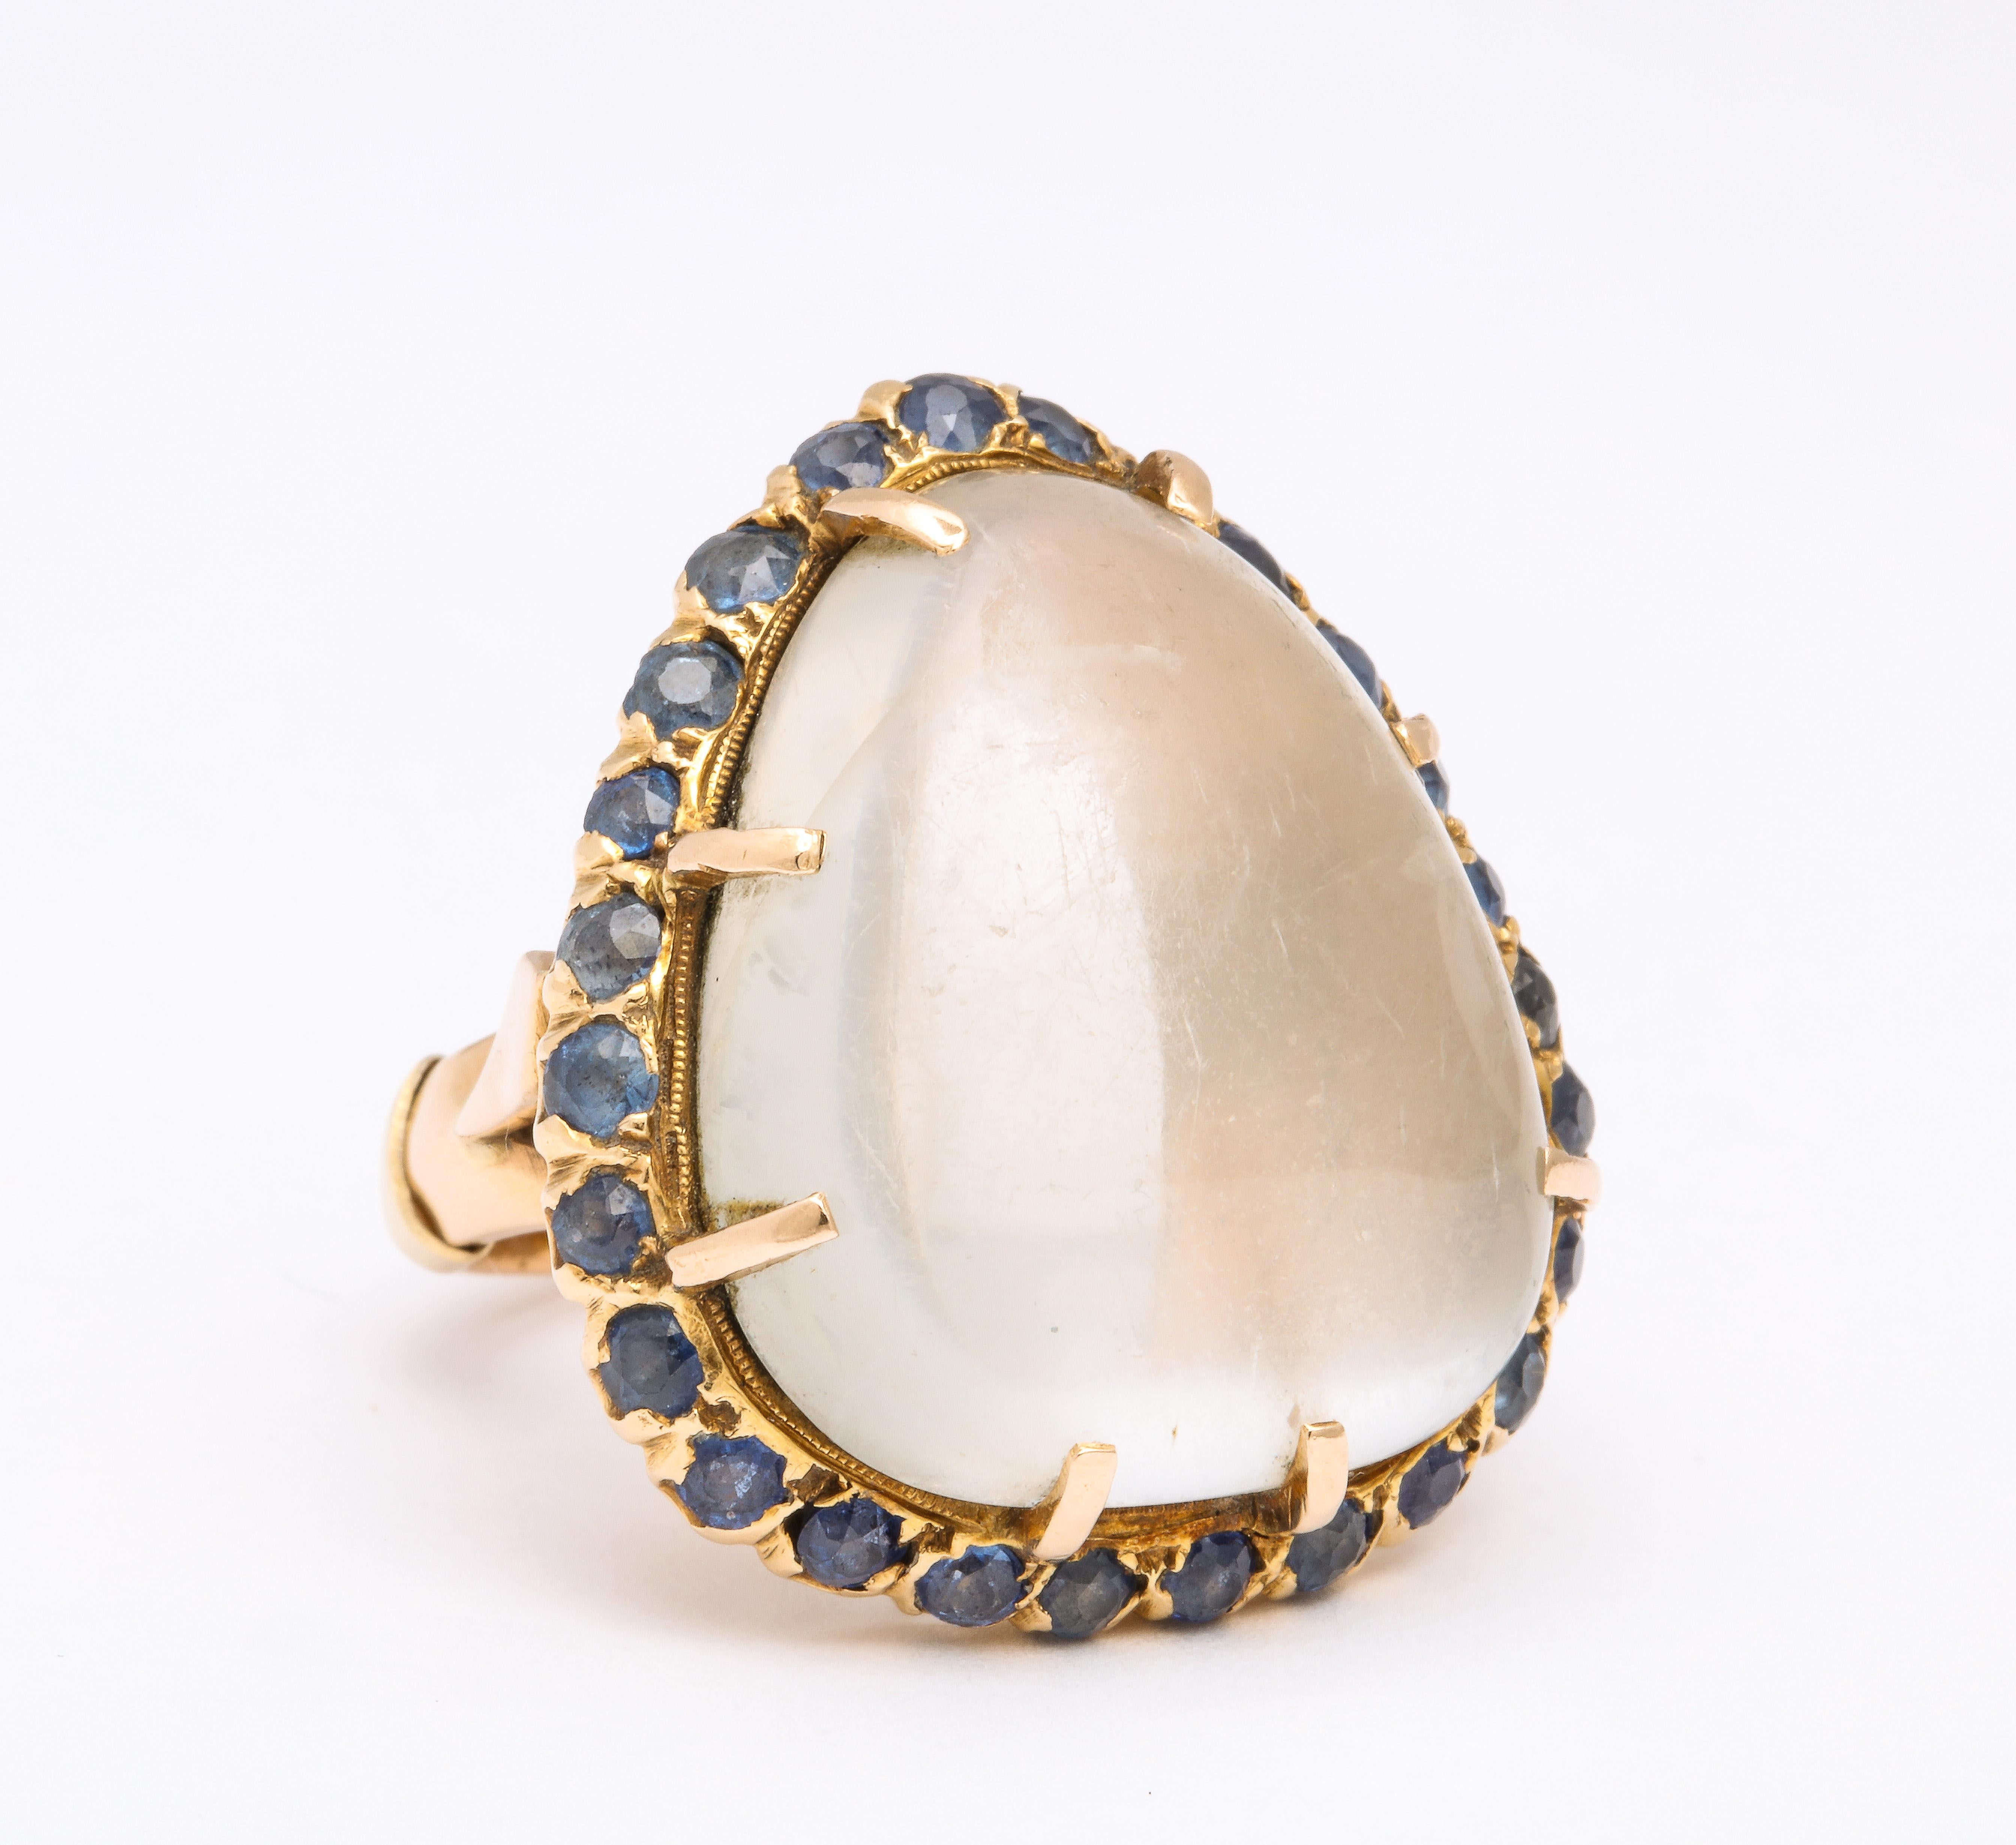 This ring showcases a beautiful 11 carat natural Pear Moonstone, surrounded by old mine cut sapphires and set in 14k Yellow Gold. It is unmarked but has been tested. 

Materials:
14k Yellow Gold, 12.0 dwt

Stones:
Unmarked but tested natural